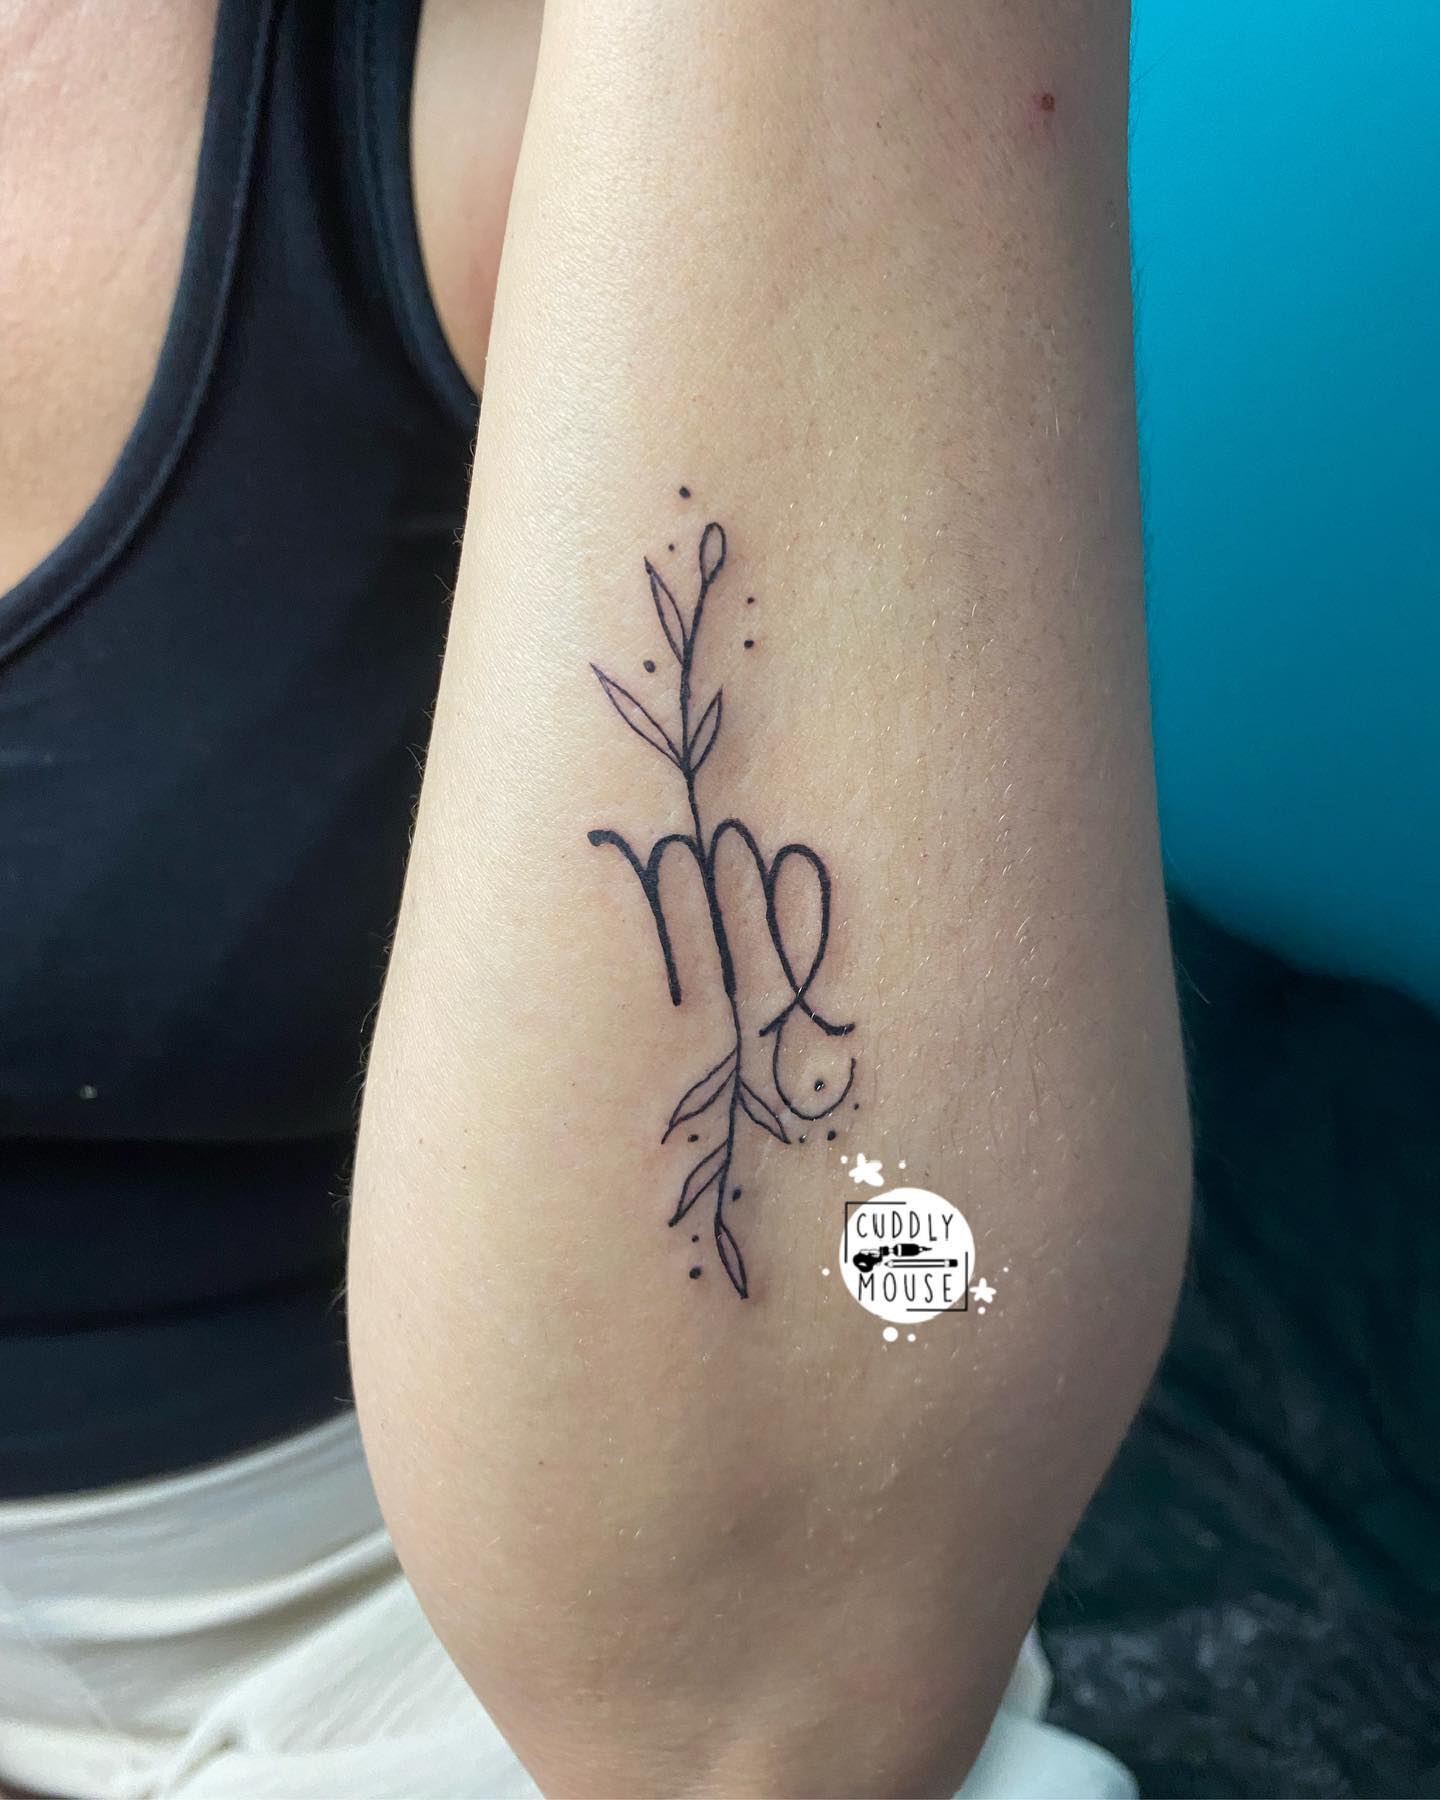 You can get a simple Virgo tattoo on your forearm if you are a minimalist tattoo person. The branches that come out of the sign give this tattoo a chic look.